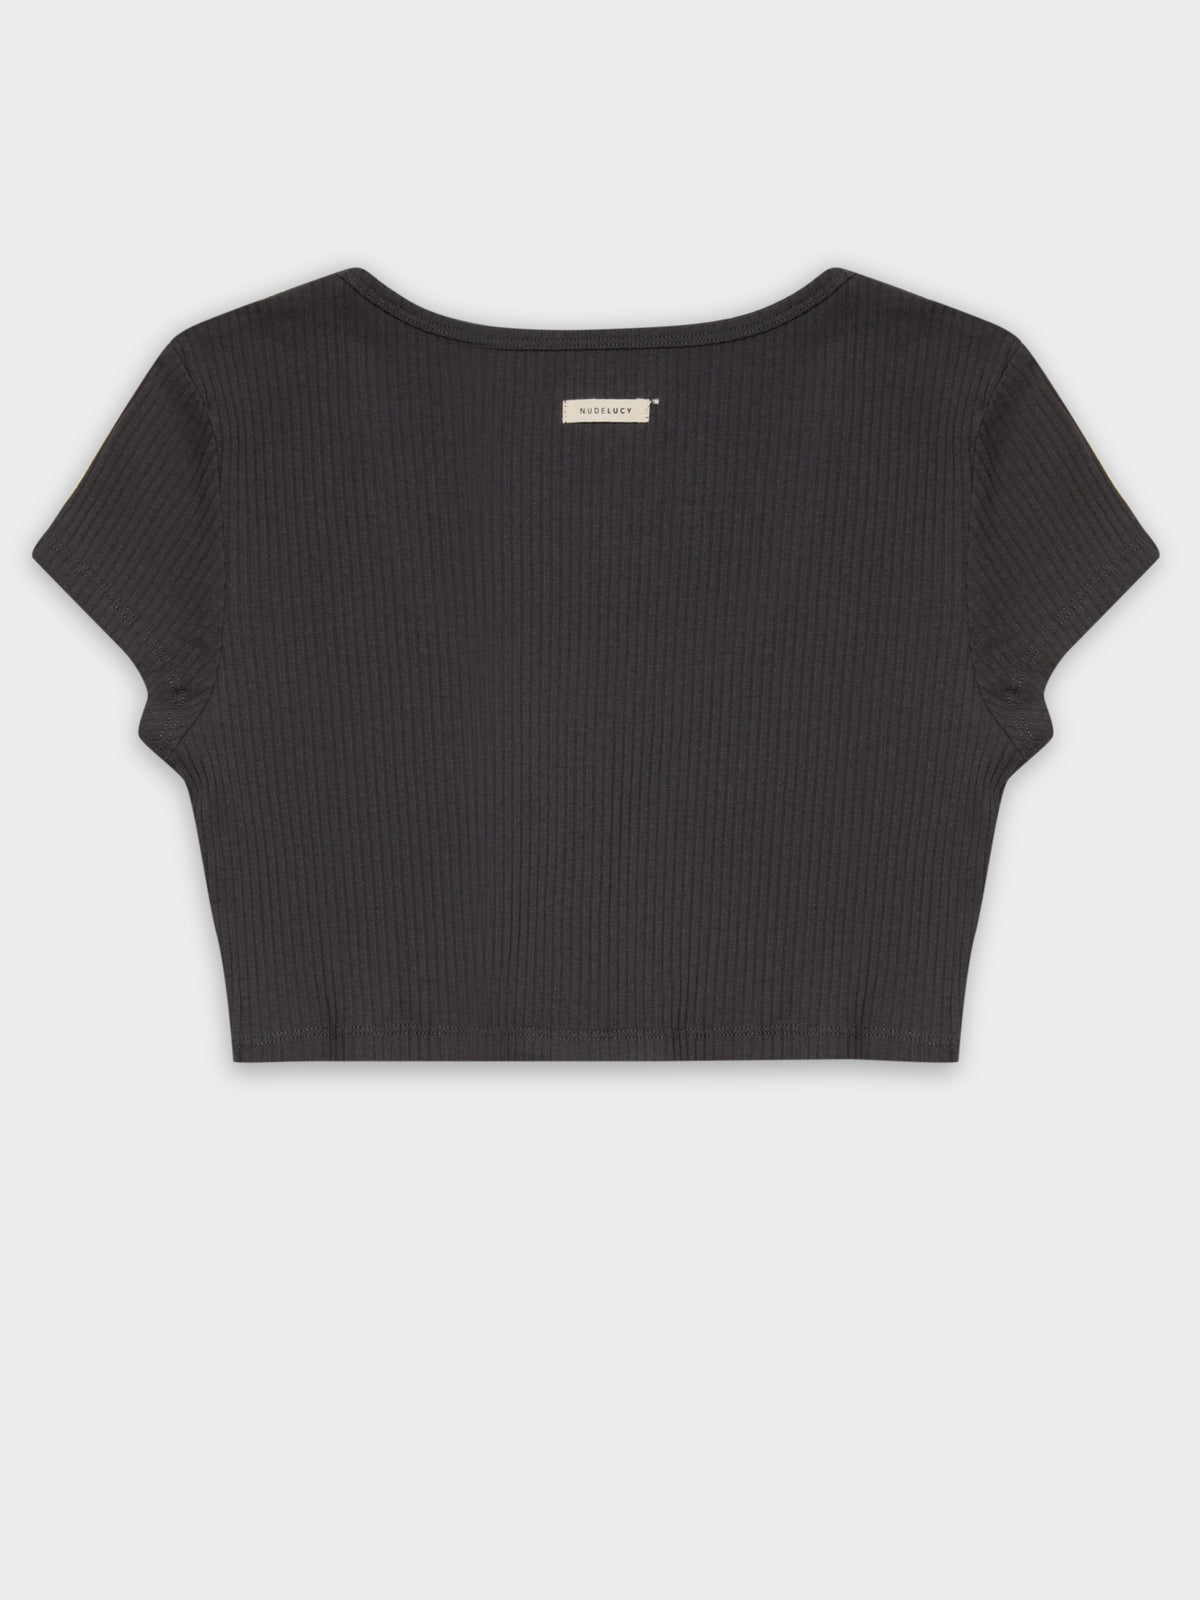 Ribbed Lounge Button T-Shirt in Coal